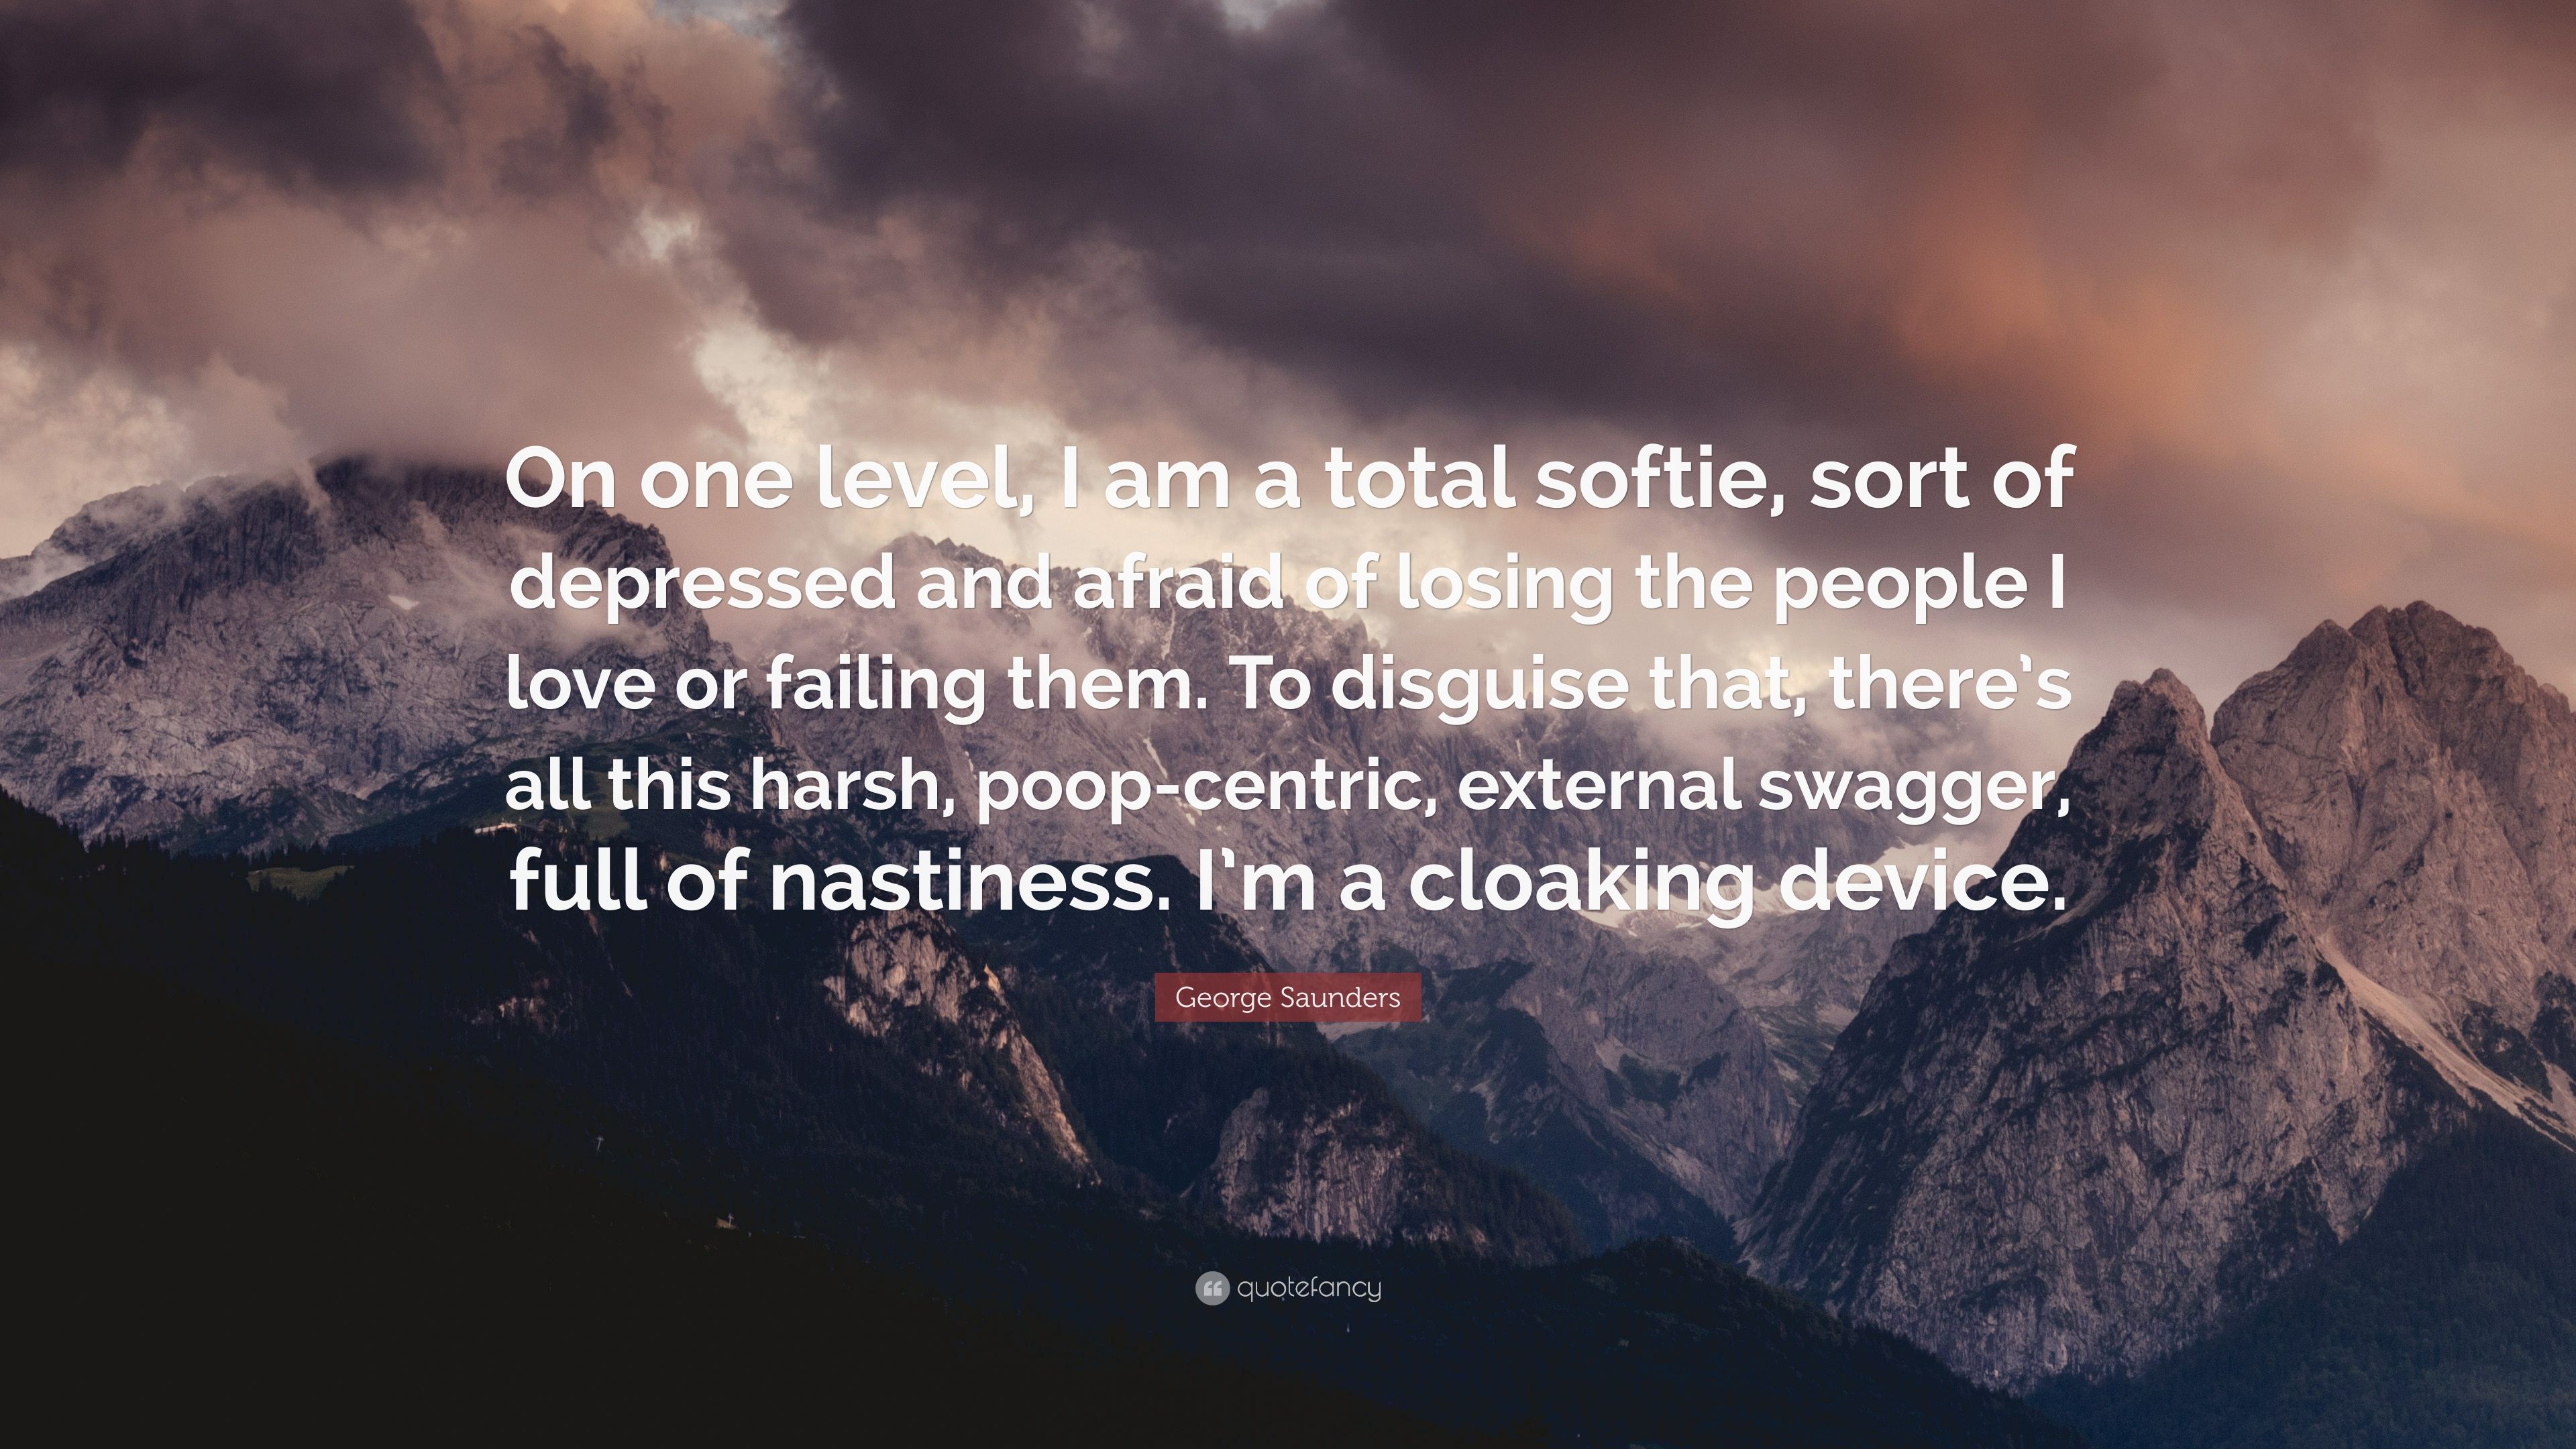 George Saunders Quote: “On one level, I am a total softie, sort